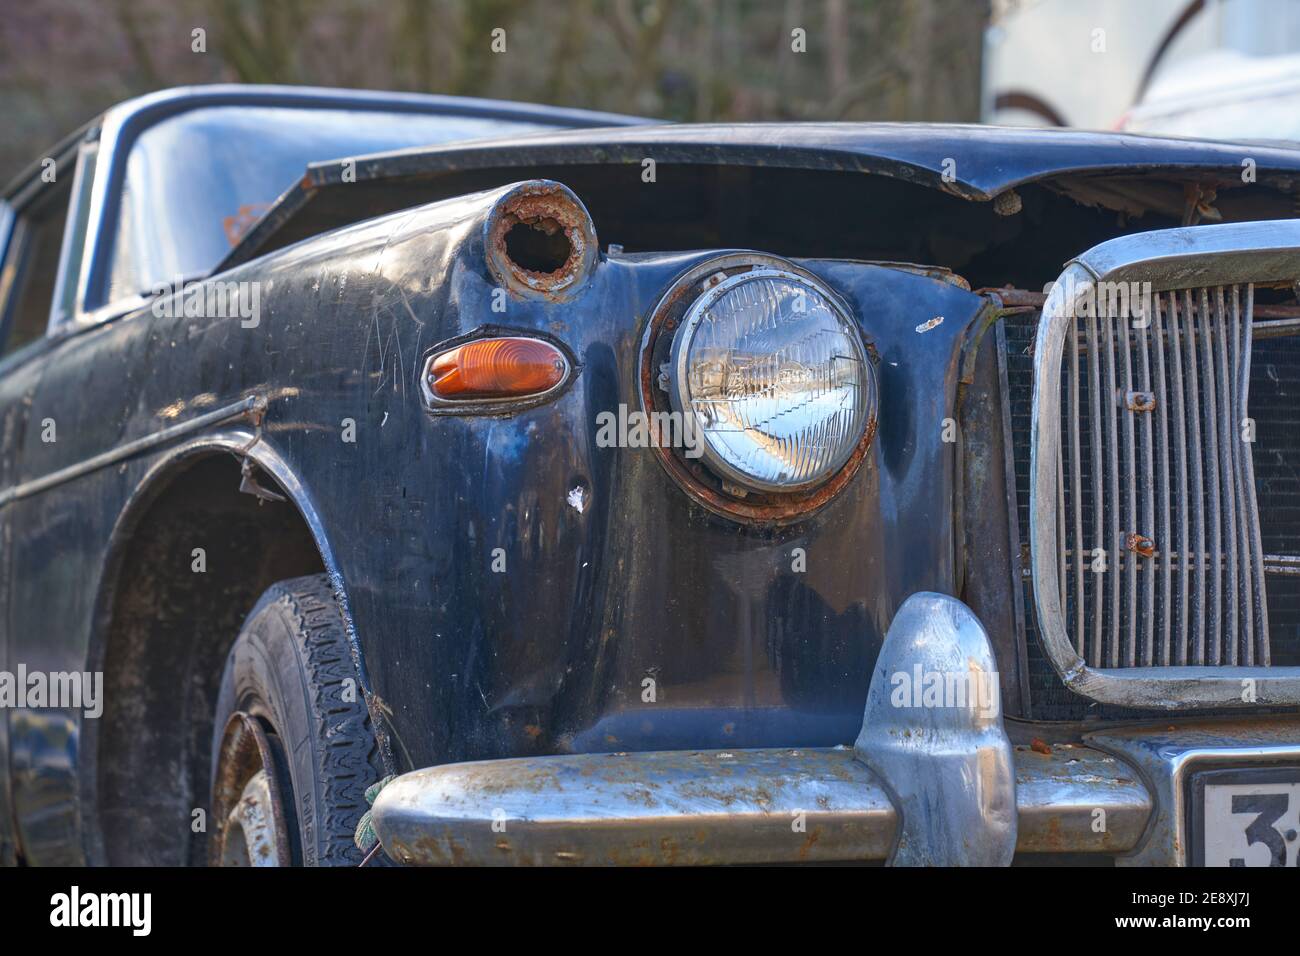 Abandoned old classic blue rover that has been left outside a workshop Stock Photo